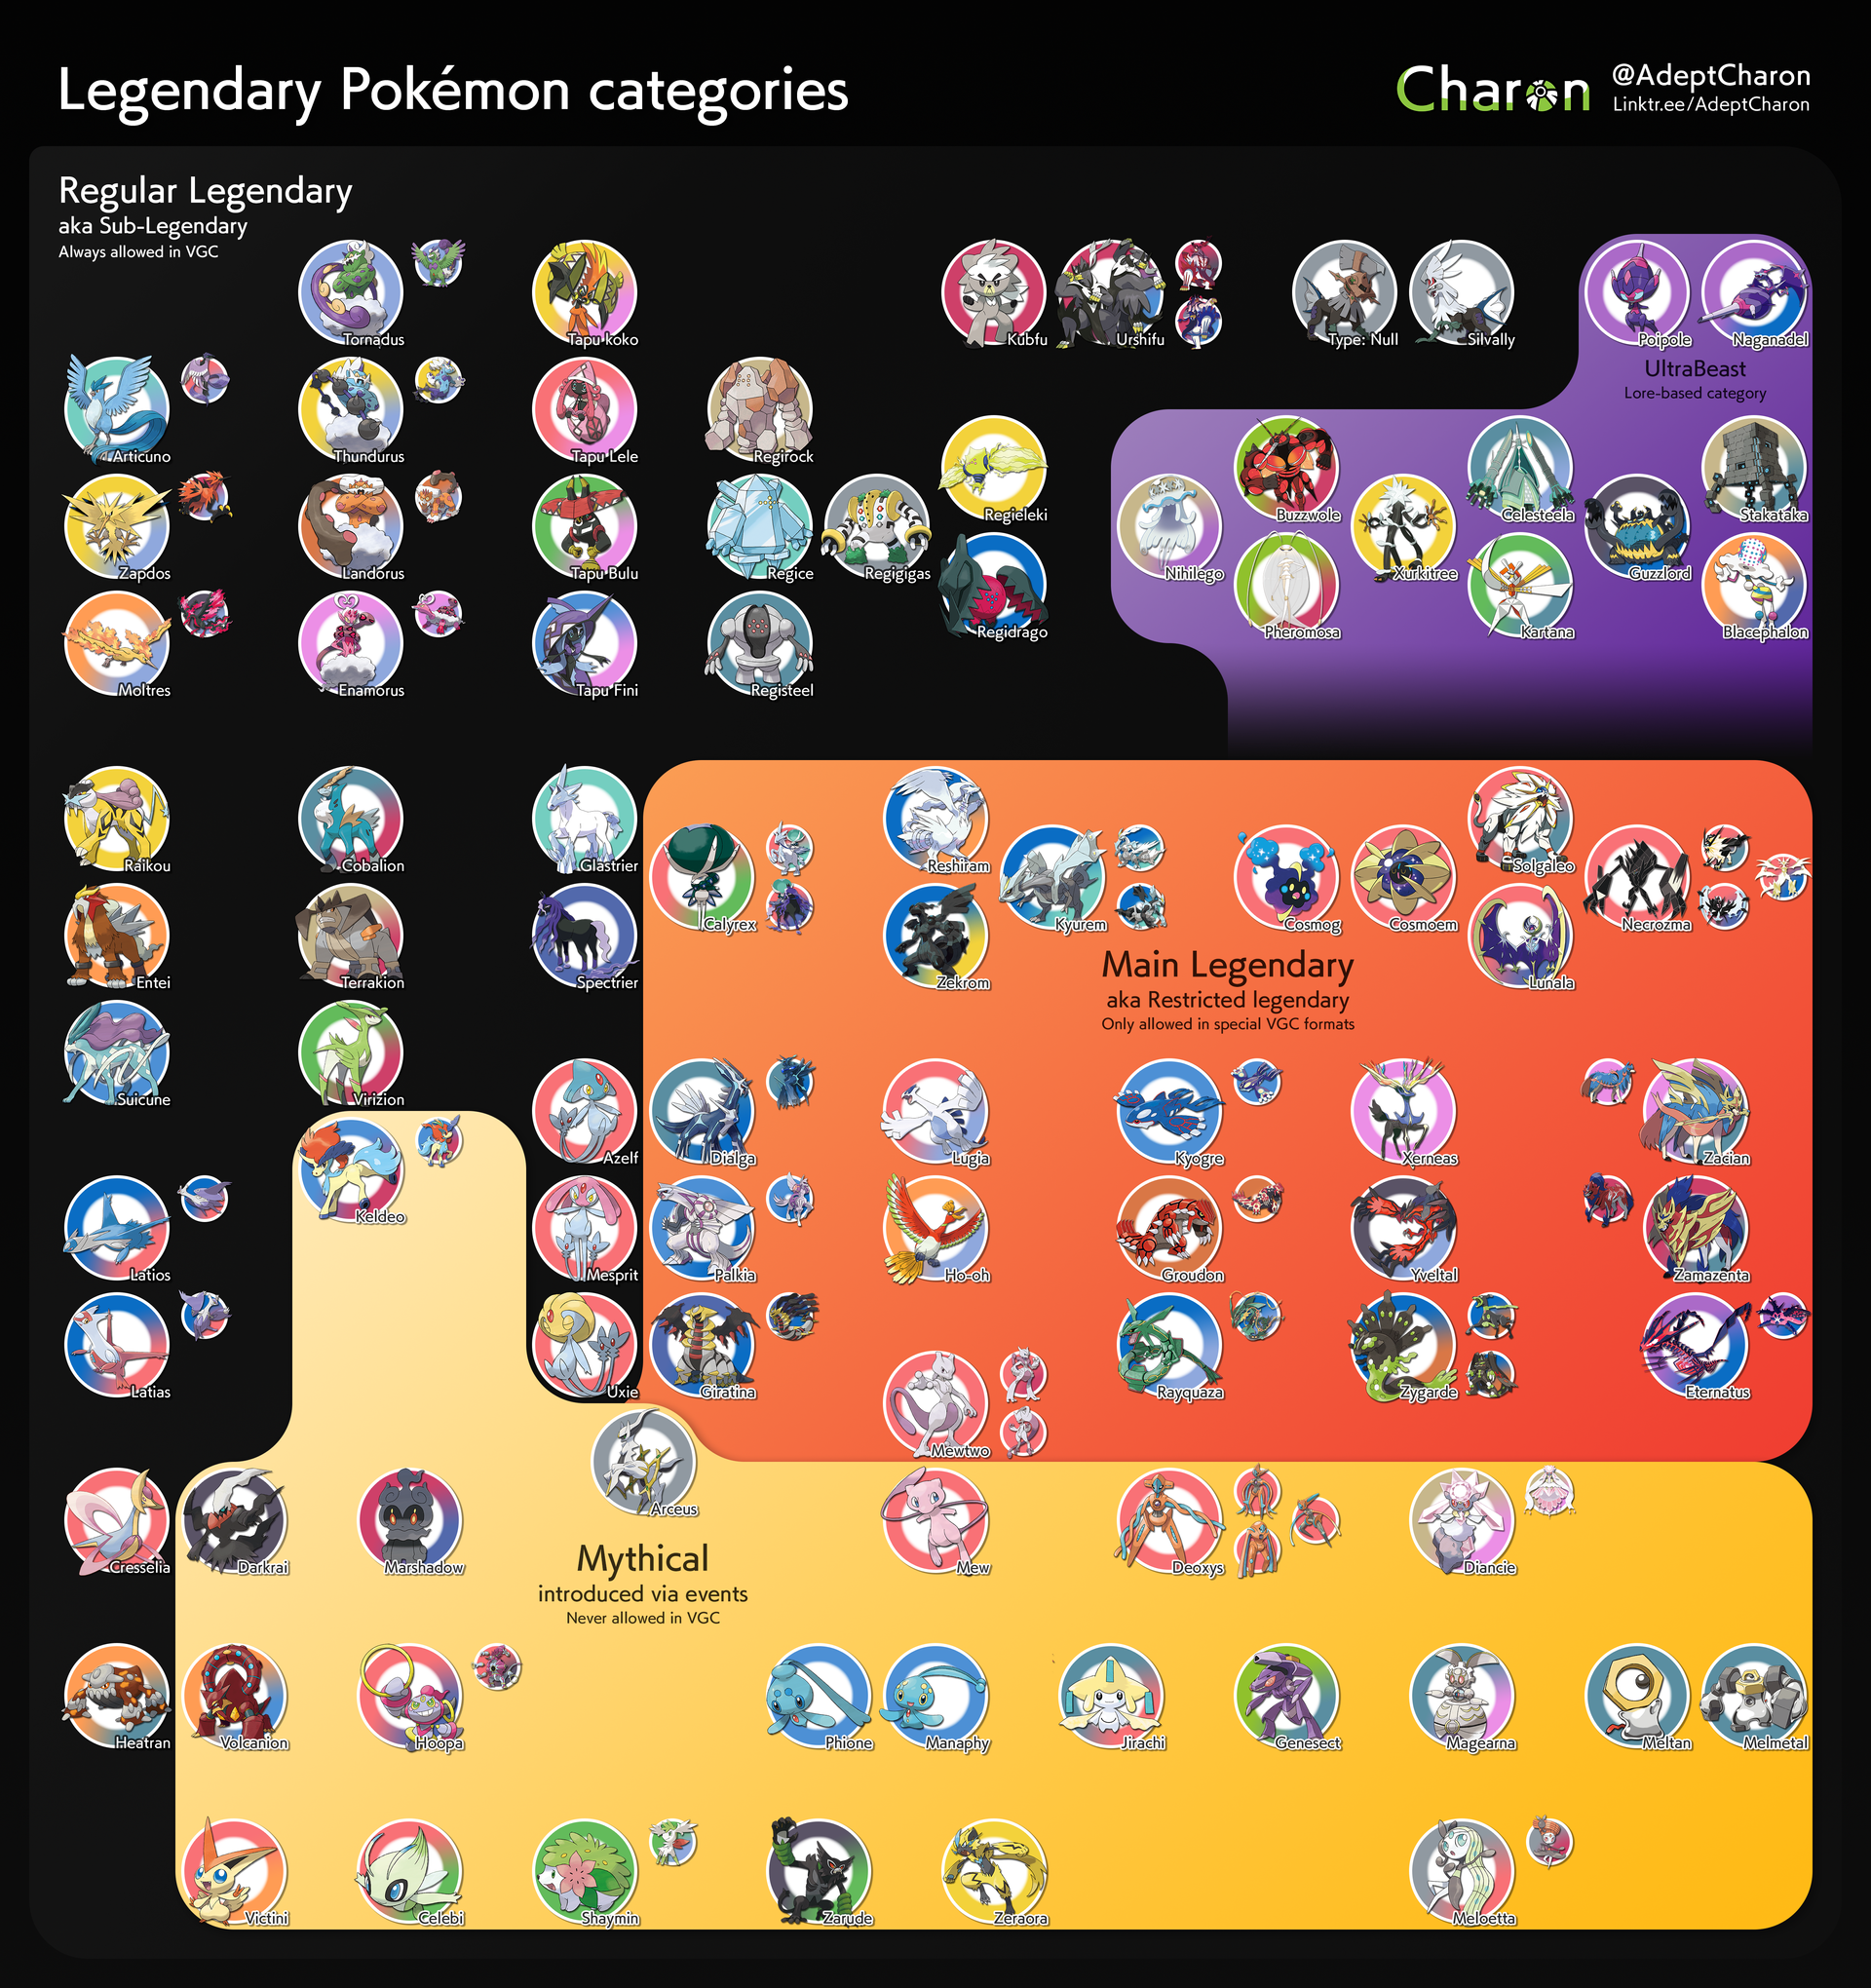 Pokemon type lists by generation. by AdeptCharon on DeviantArt